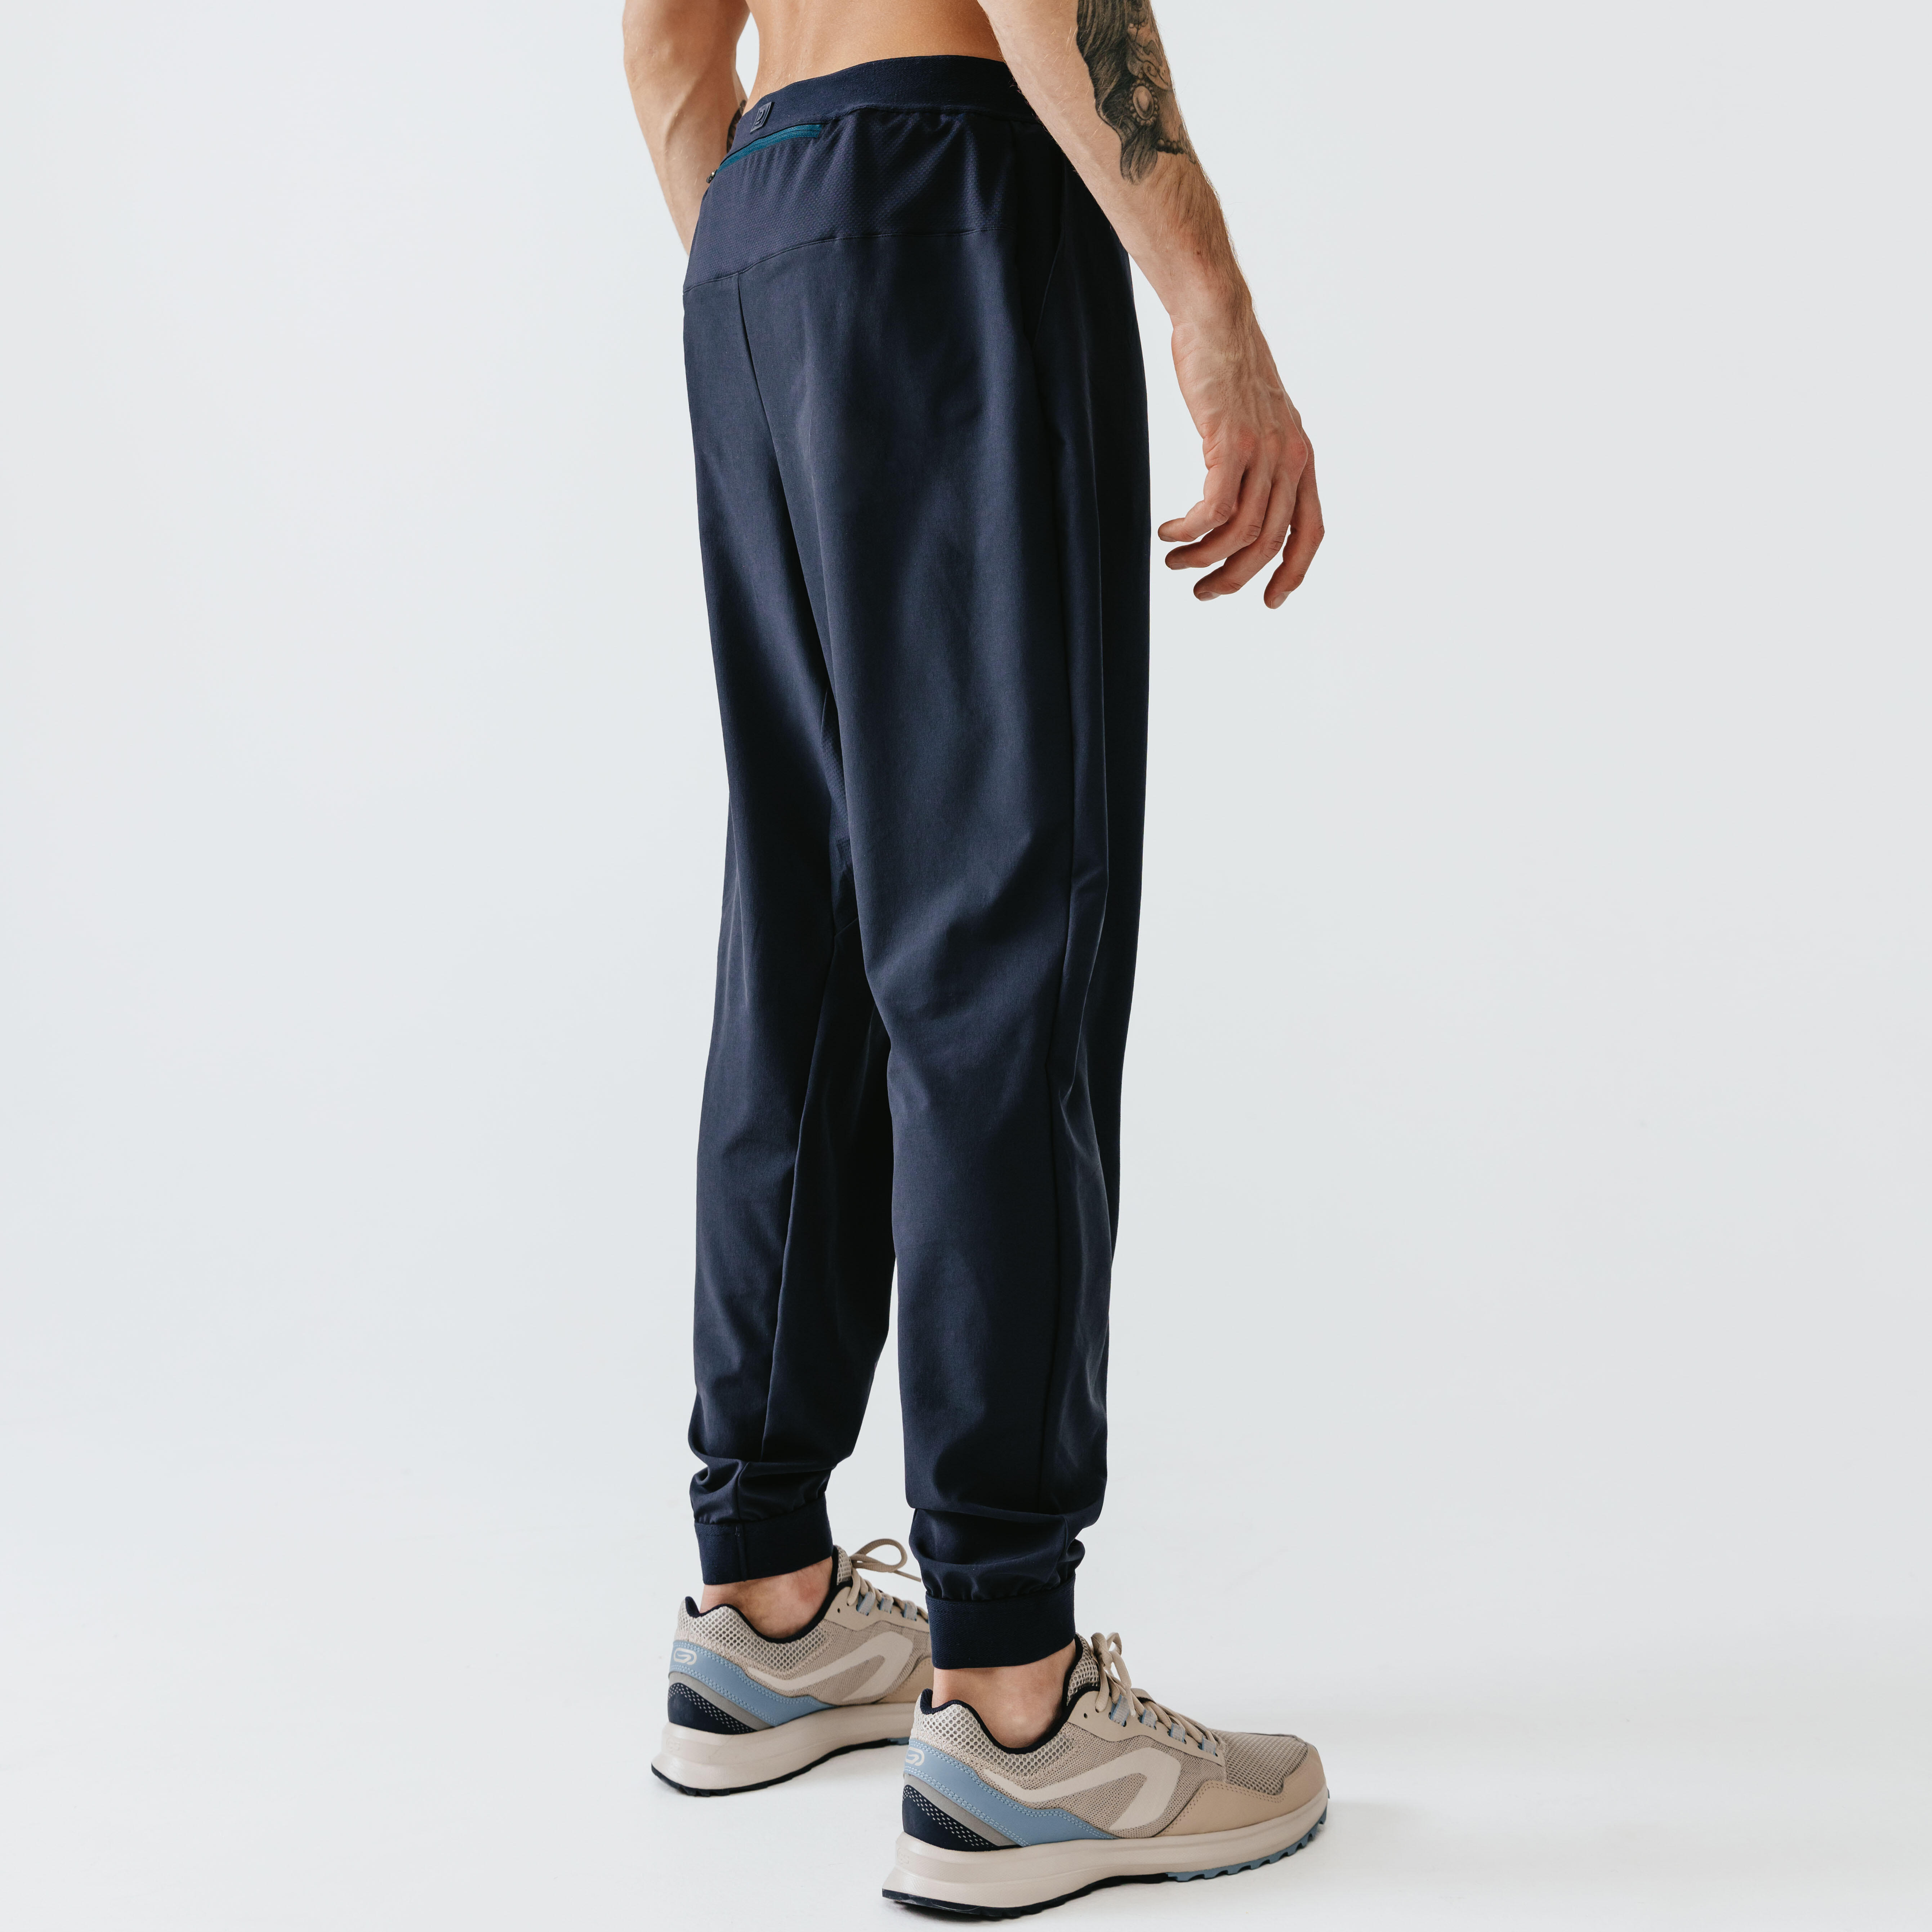 FLX by Decathlon Solid Men Blue Track Pants  Buy FLX by Decathlon Solid Men  Blue Track Pants Online at Best Prices in India  Flipkartcom